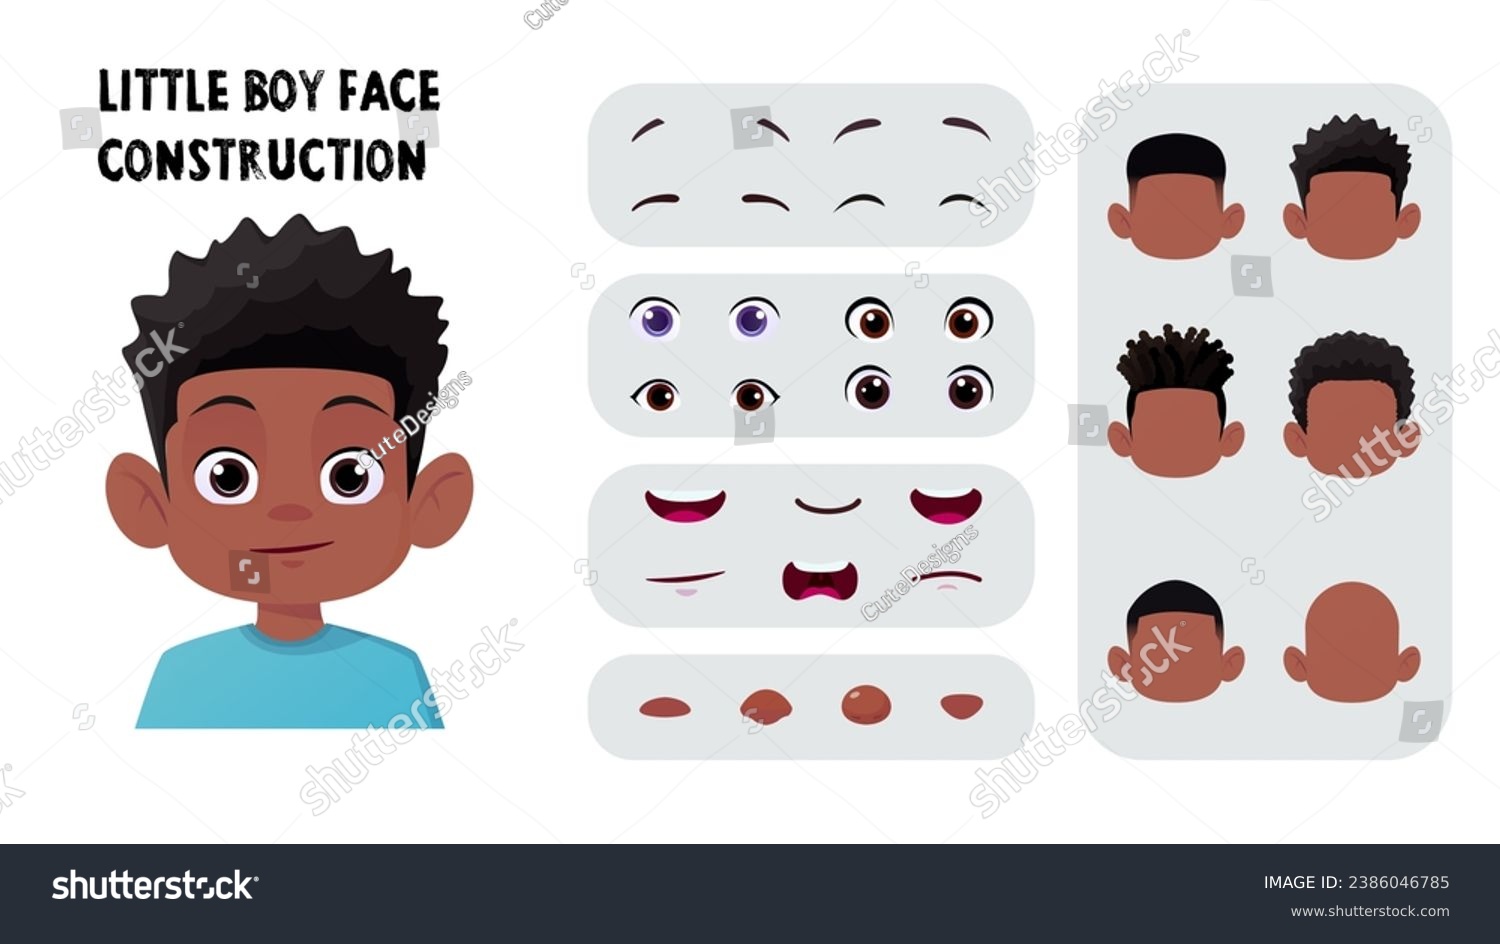 SVG of Black Cartoon Boy Face Construction, Child Avatar Maker with Afro Hair, Eyes and Mouth Premium Vector svg